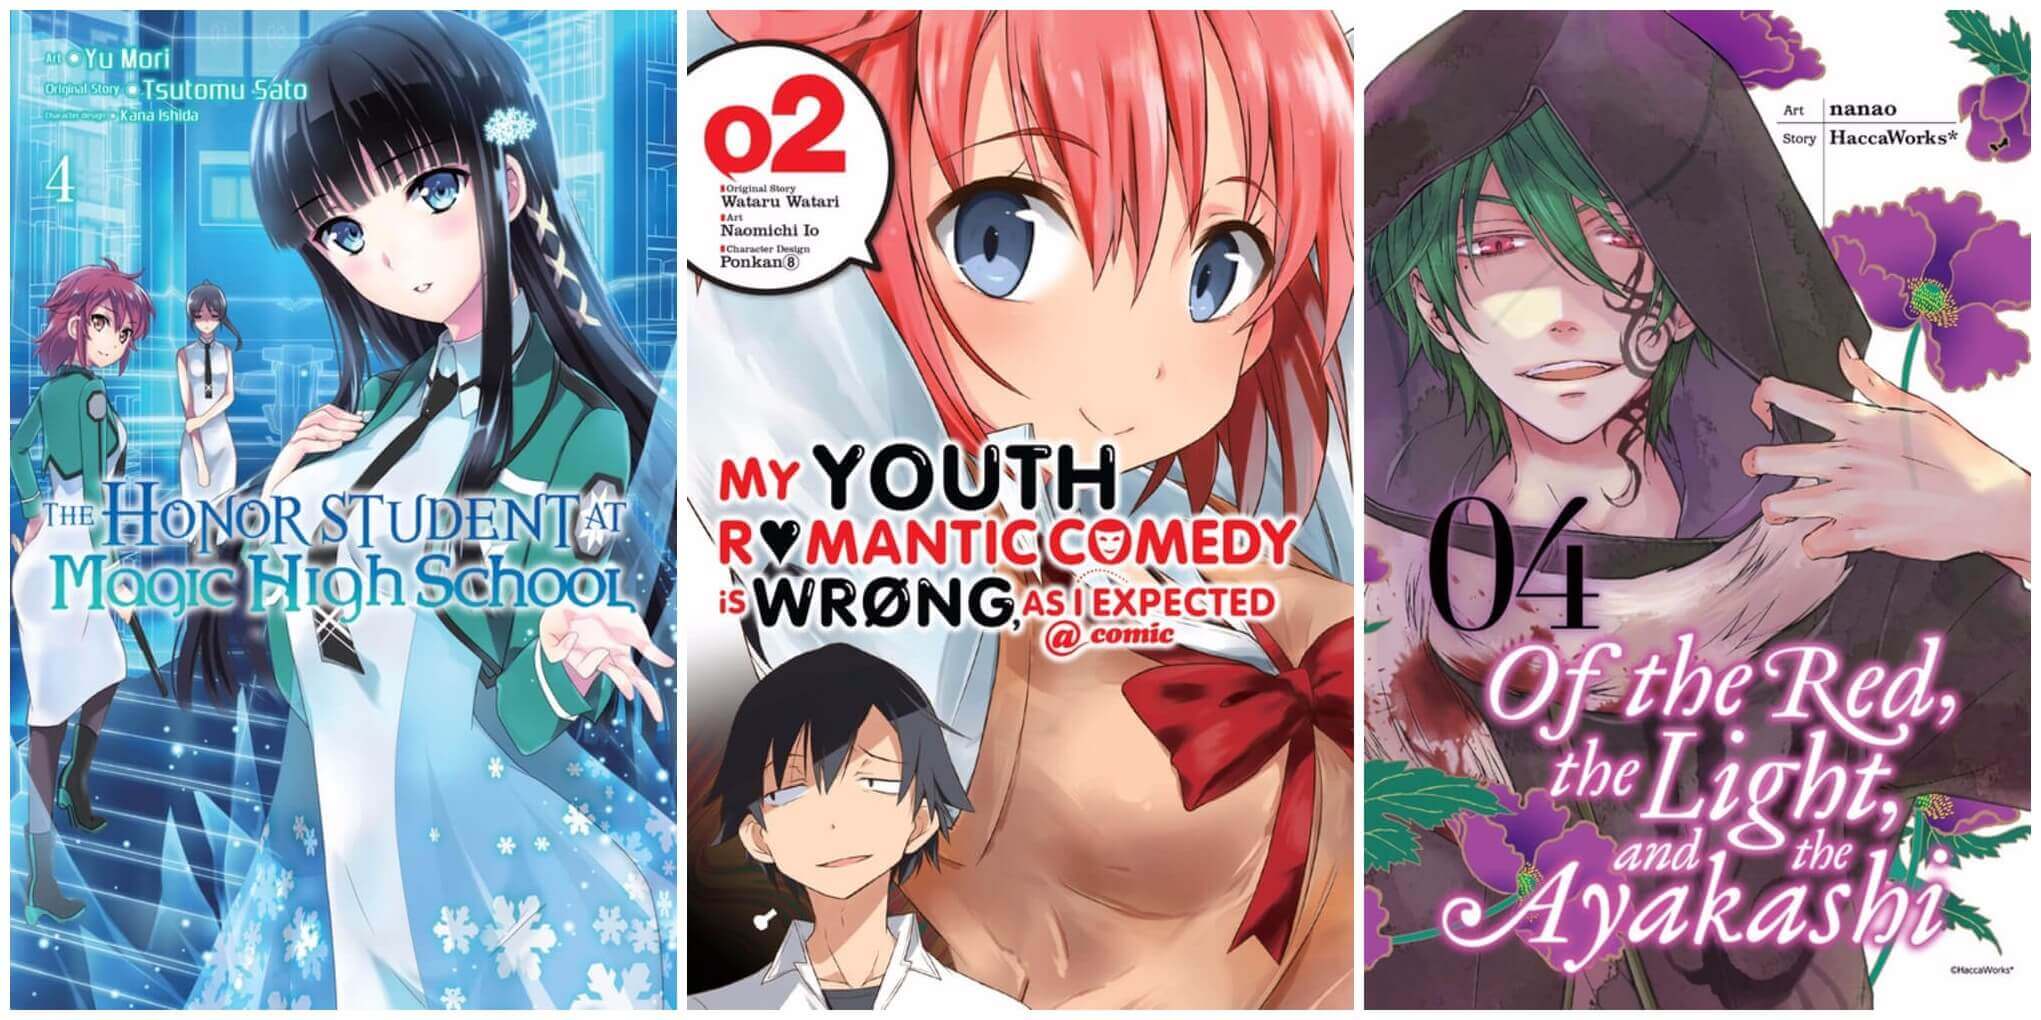 September 2016 Manga Releases Covers for The Honor Student at Magic High School, My Youth Romantic Comedy is Wrong, and Of the Red, the Light, and the Ayakashi.